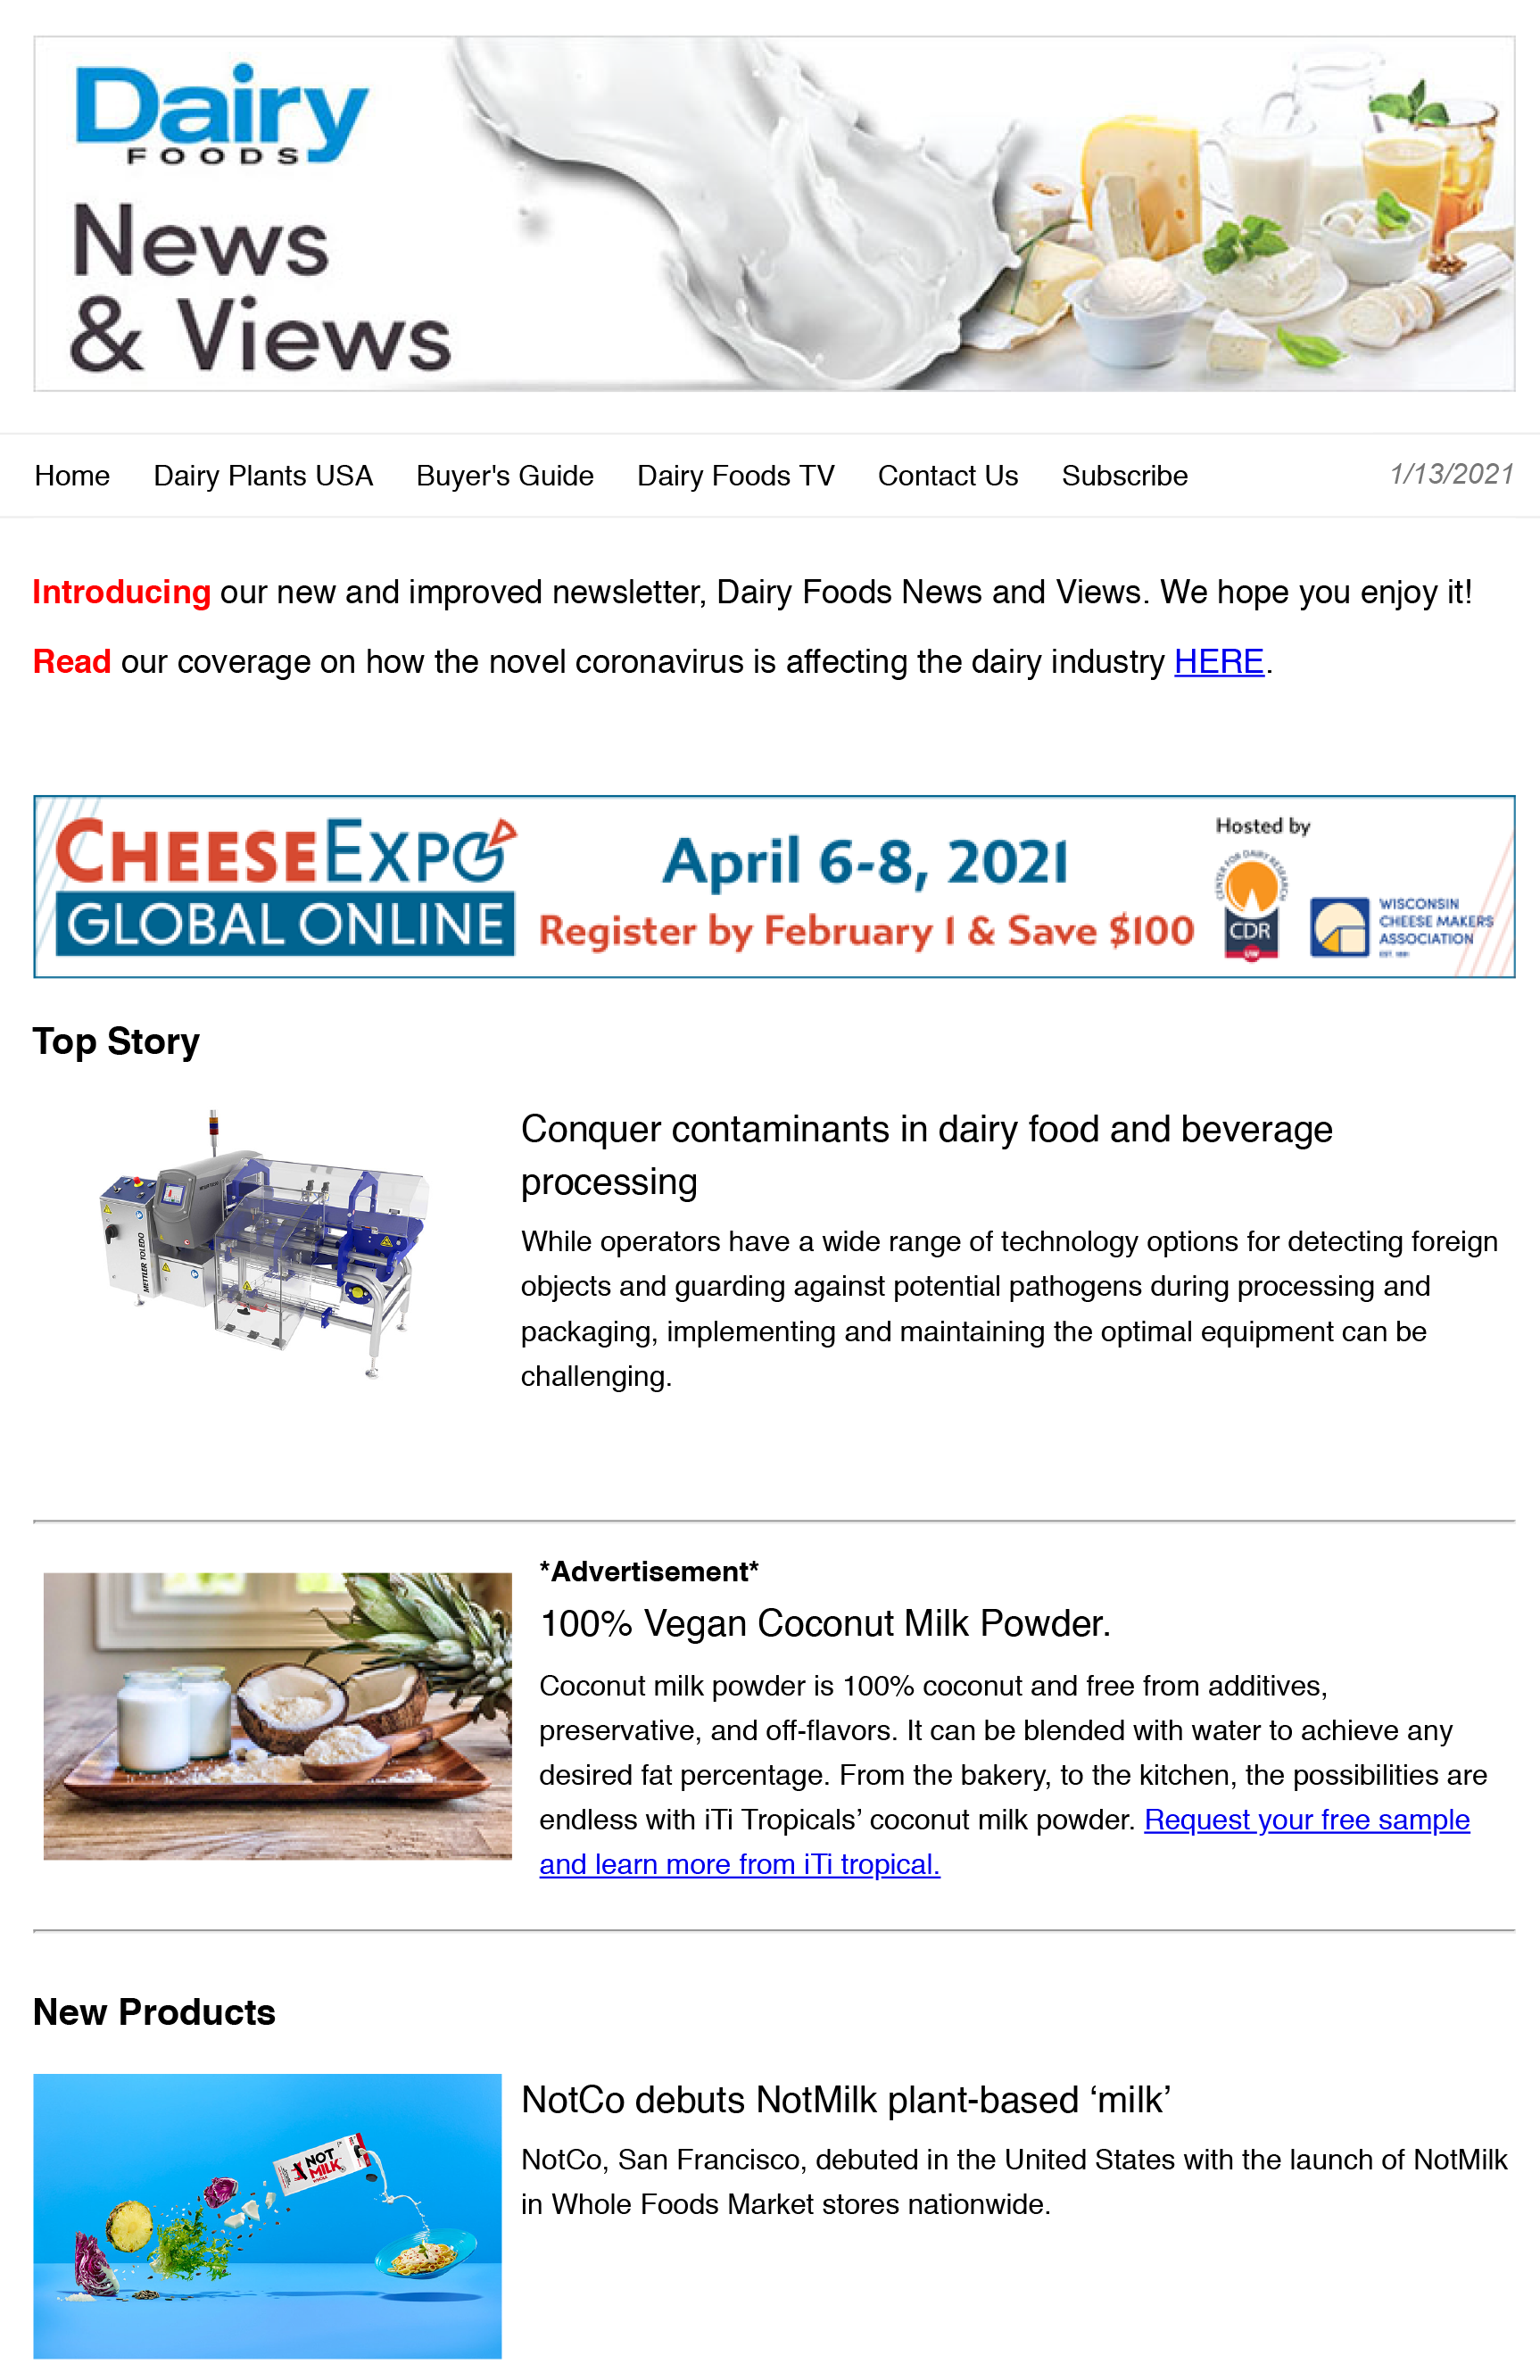 Dairy Foods dairy product innovations newsletter